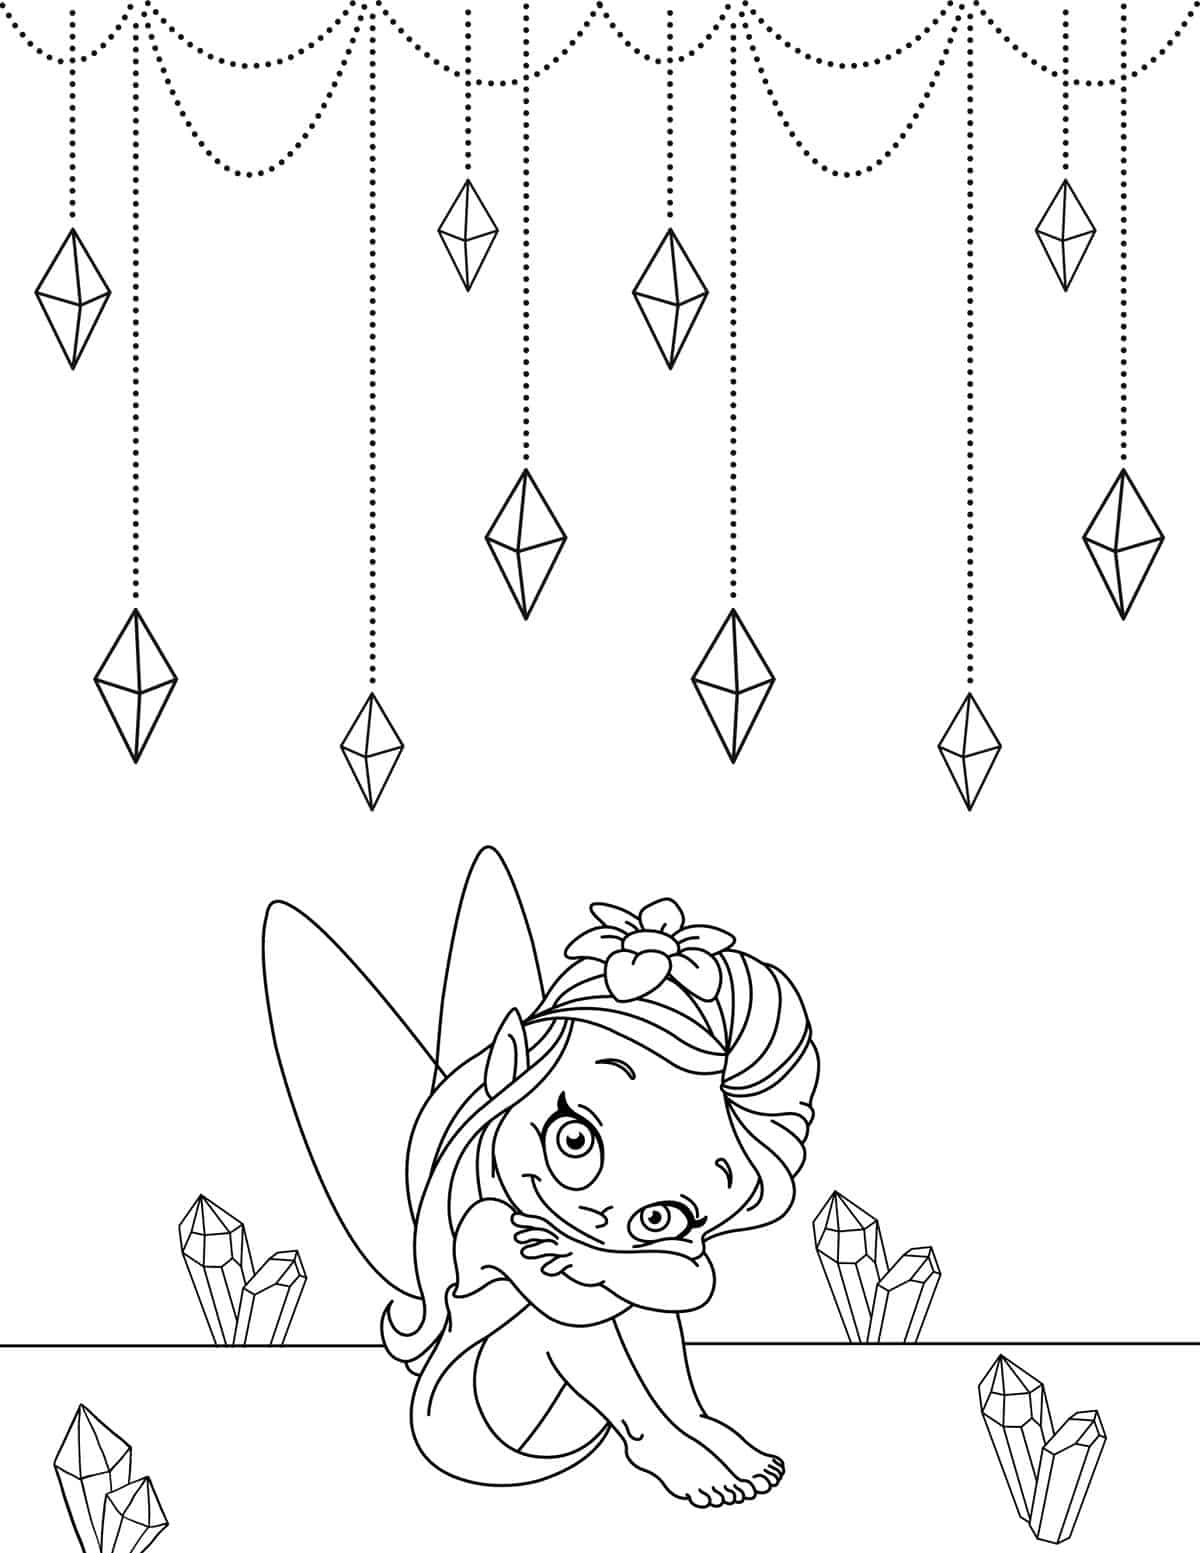 Fairy Princess's Sparkling Crystallized Realm coloring page